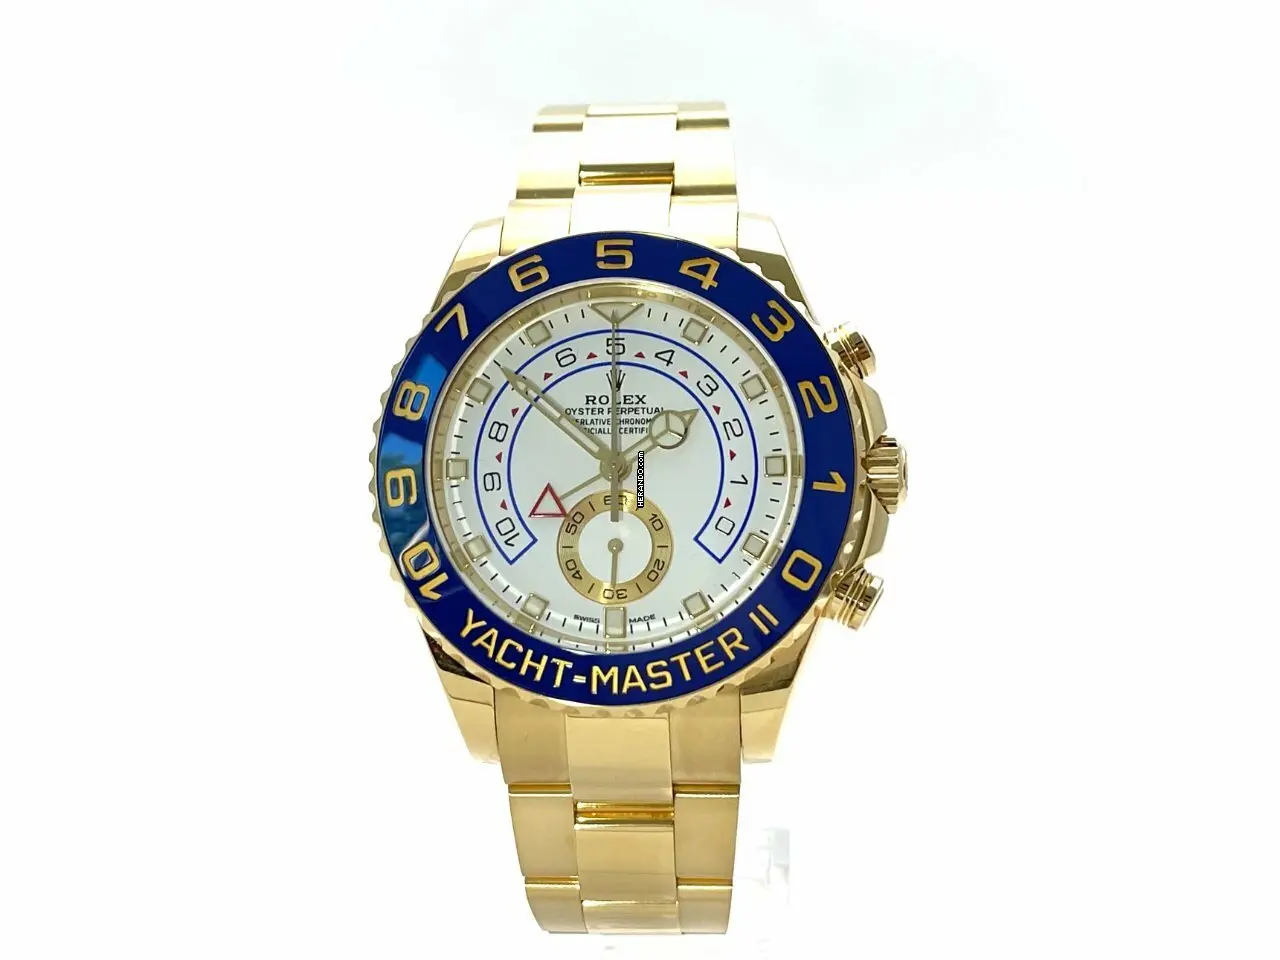 watches-114598-6924415-ahr9of2dky07gb1xhsny8g0h-ExtraLarge.webp